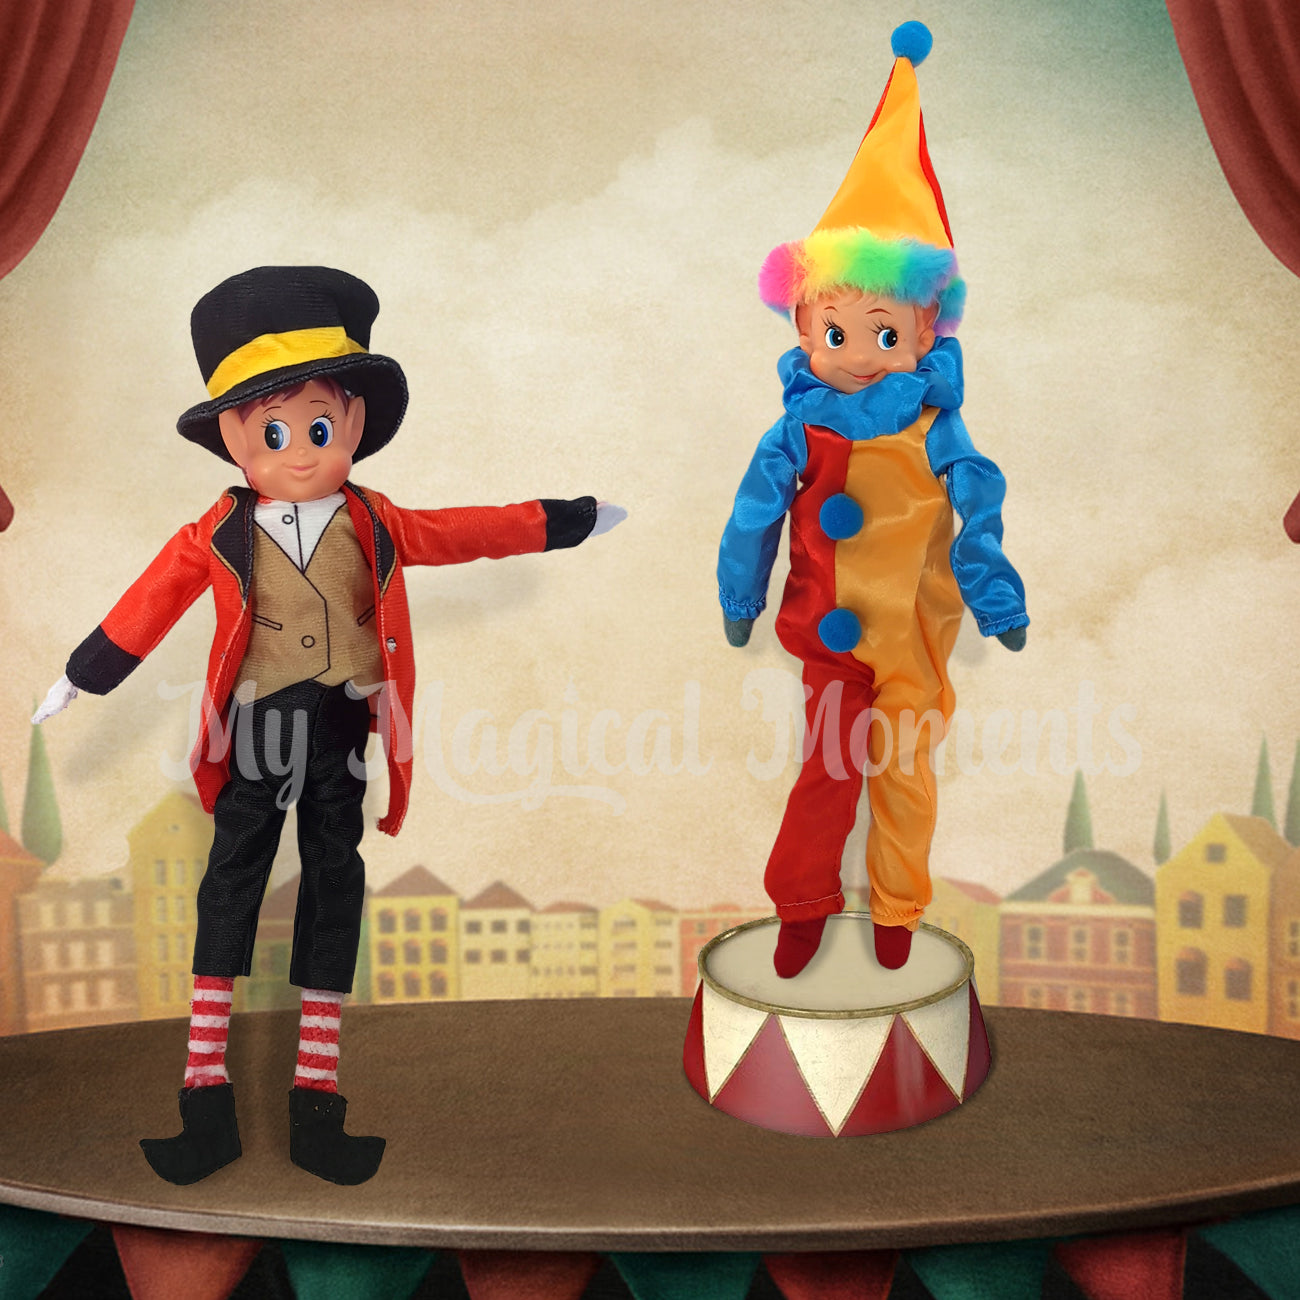 Elves at a circus wearing a ring leader costume and clown costume